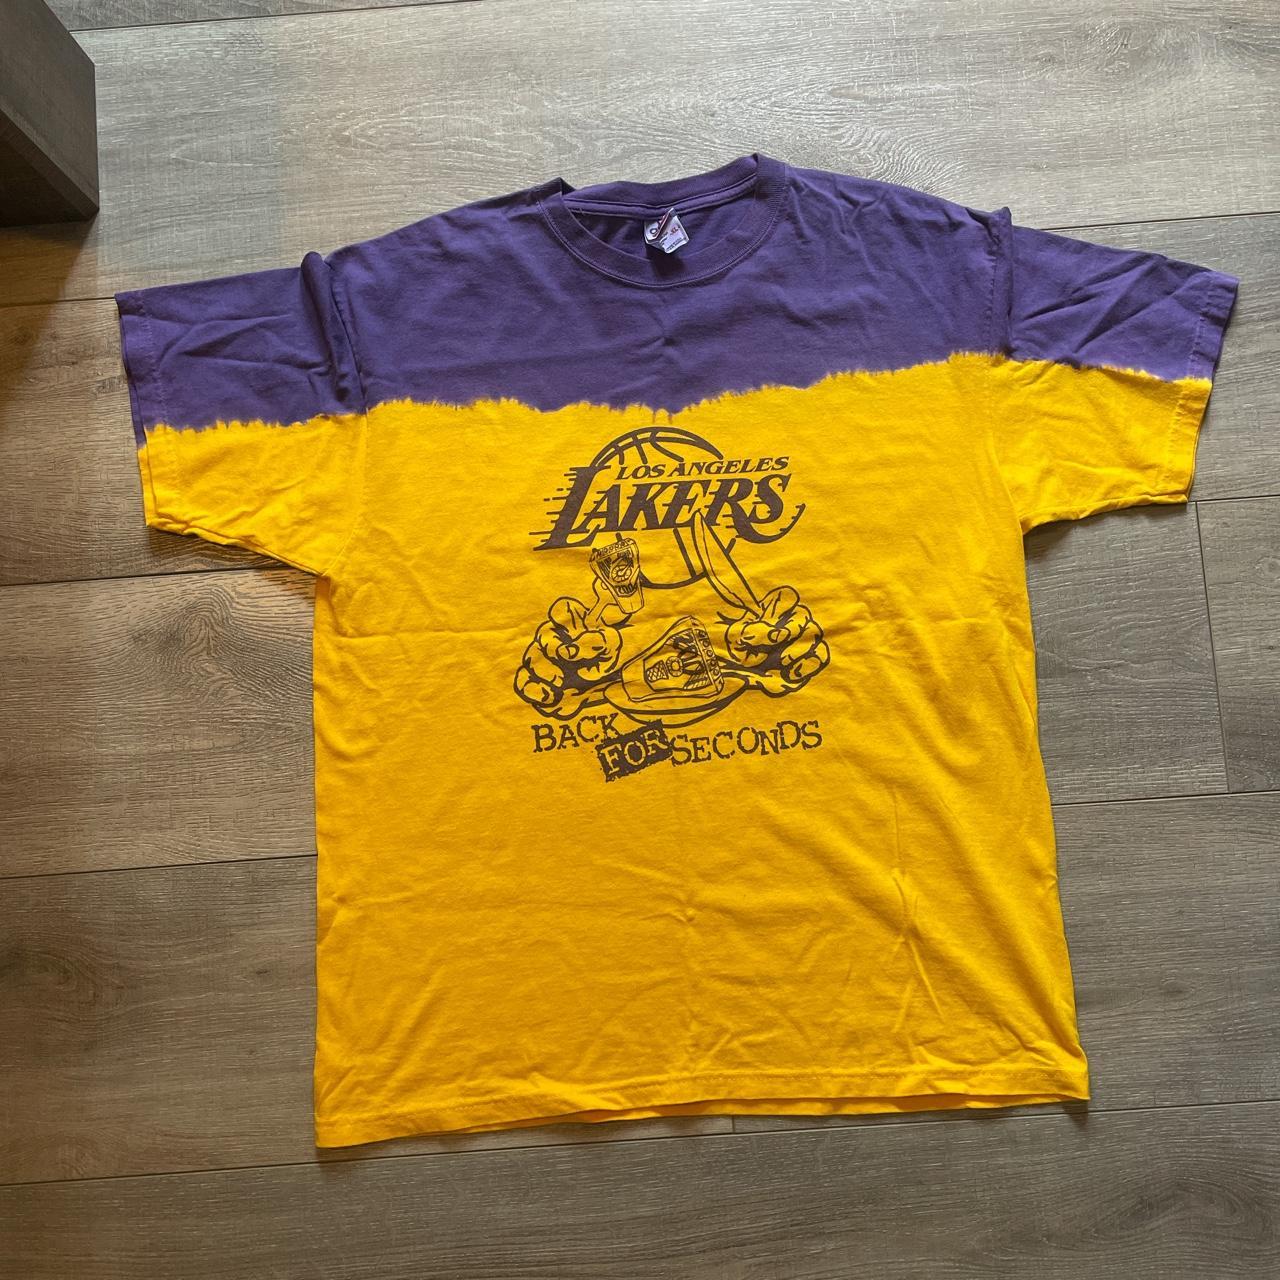 Vintage 2001 Los Angeles Lakers Tee Size XL in great